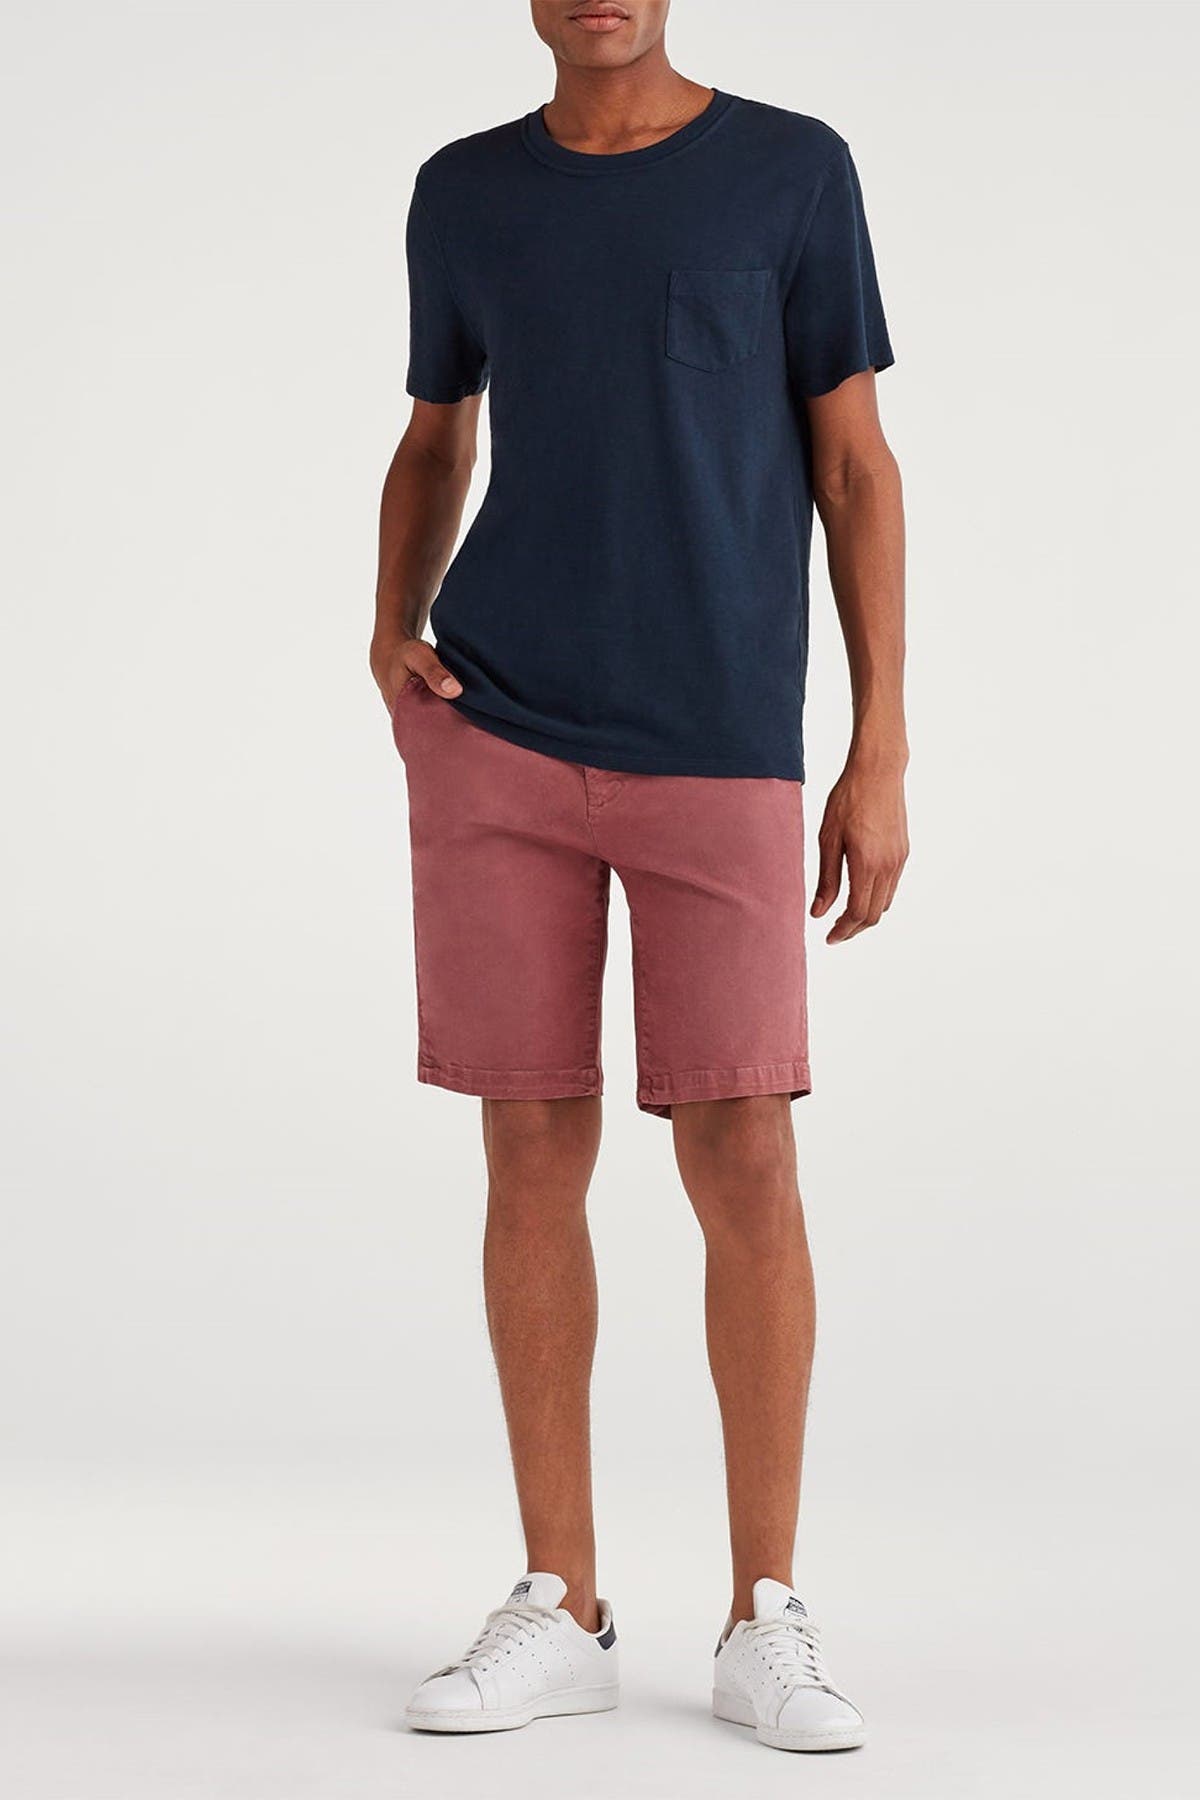 7 For All Mankind Chino Short In Light/pastel Pink9